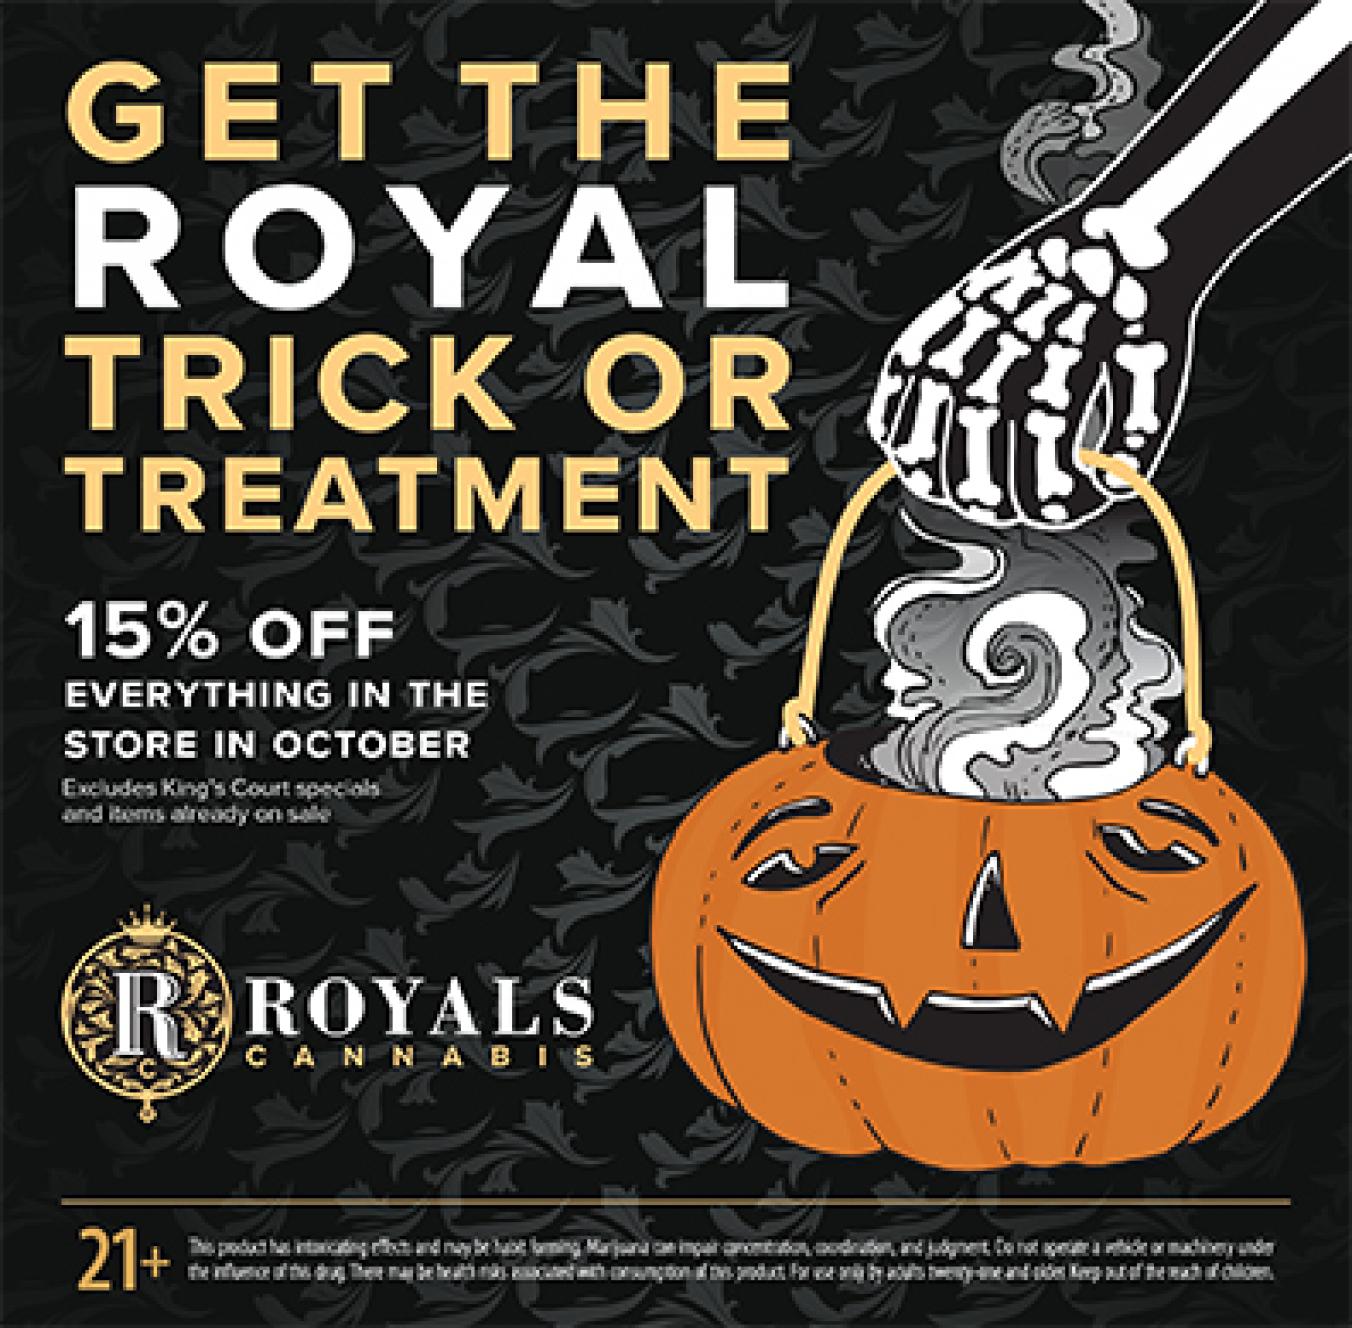 Royal Trick or Treatment! 15% Off the Entire Store